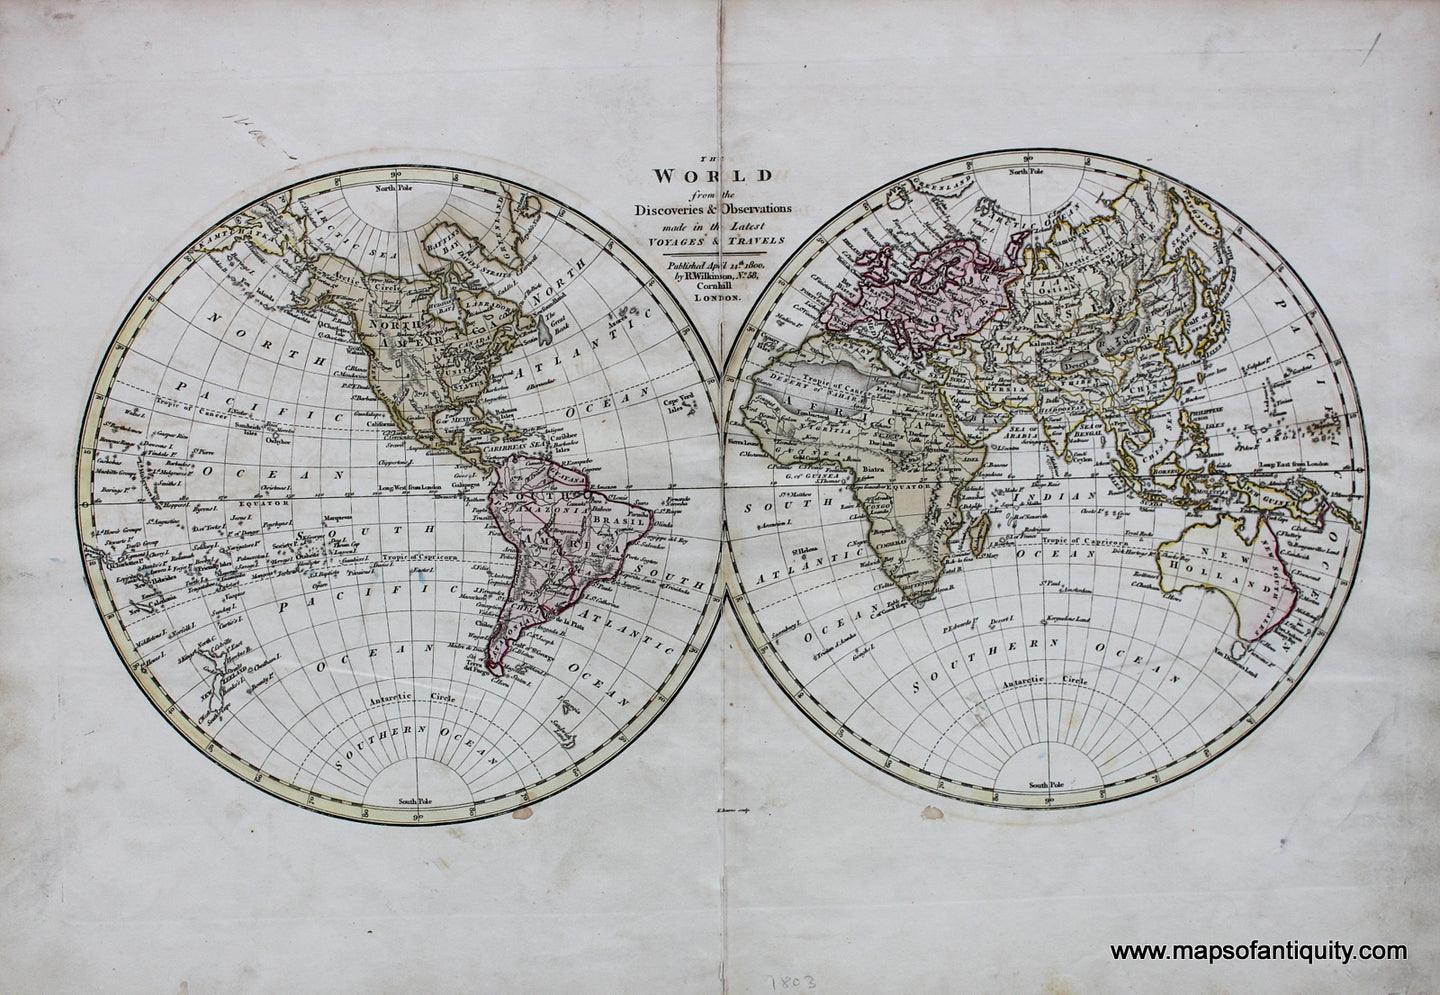 Antique-Hand-Colored-Map-The-World-from-the-Discoveries-&-Observations-made-in-the-Latest-Voyages-&-Travels-April-14th-1800**********-World--1803-Wilkinson-Maps-Of-Antiquity